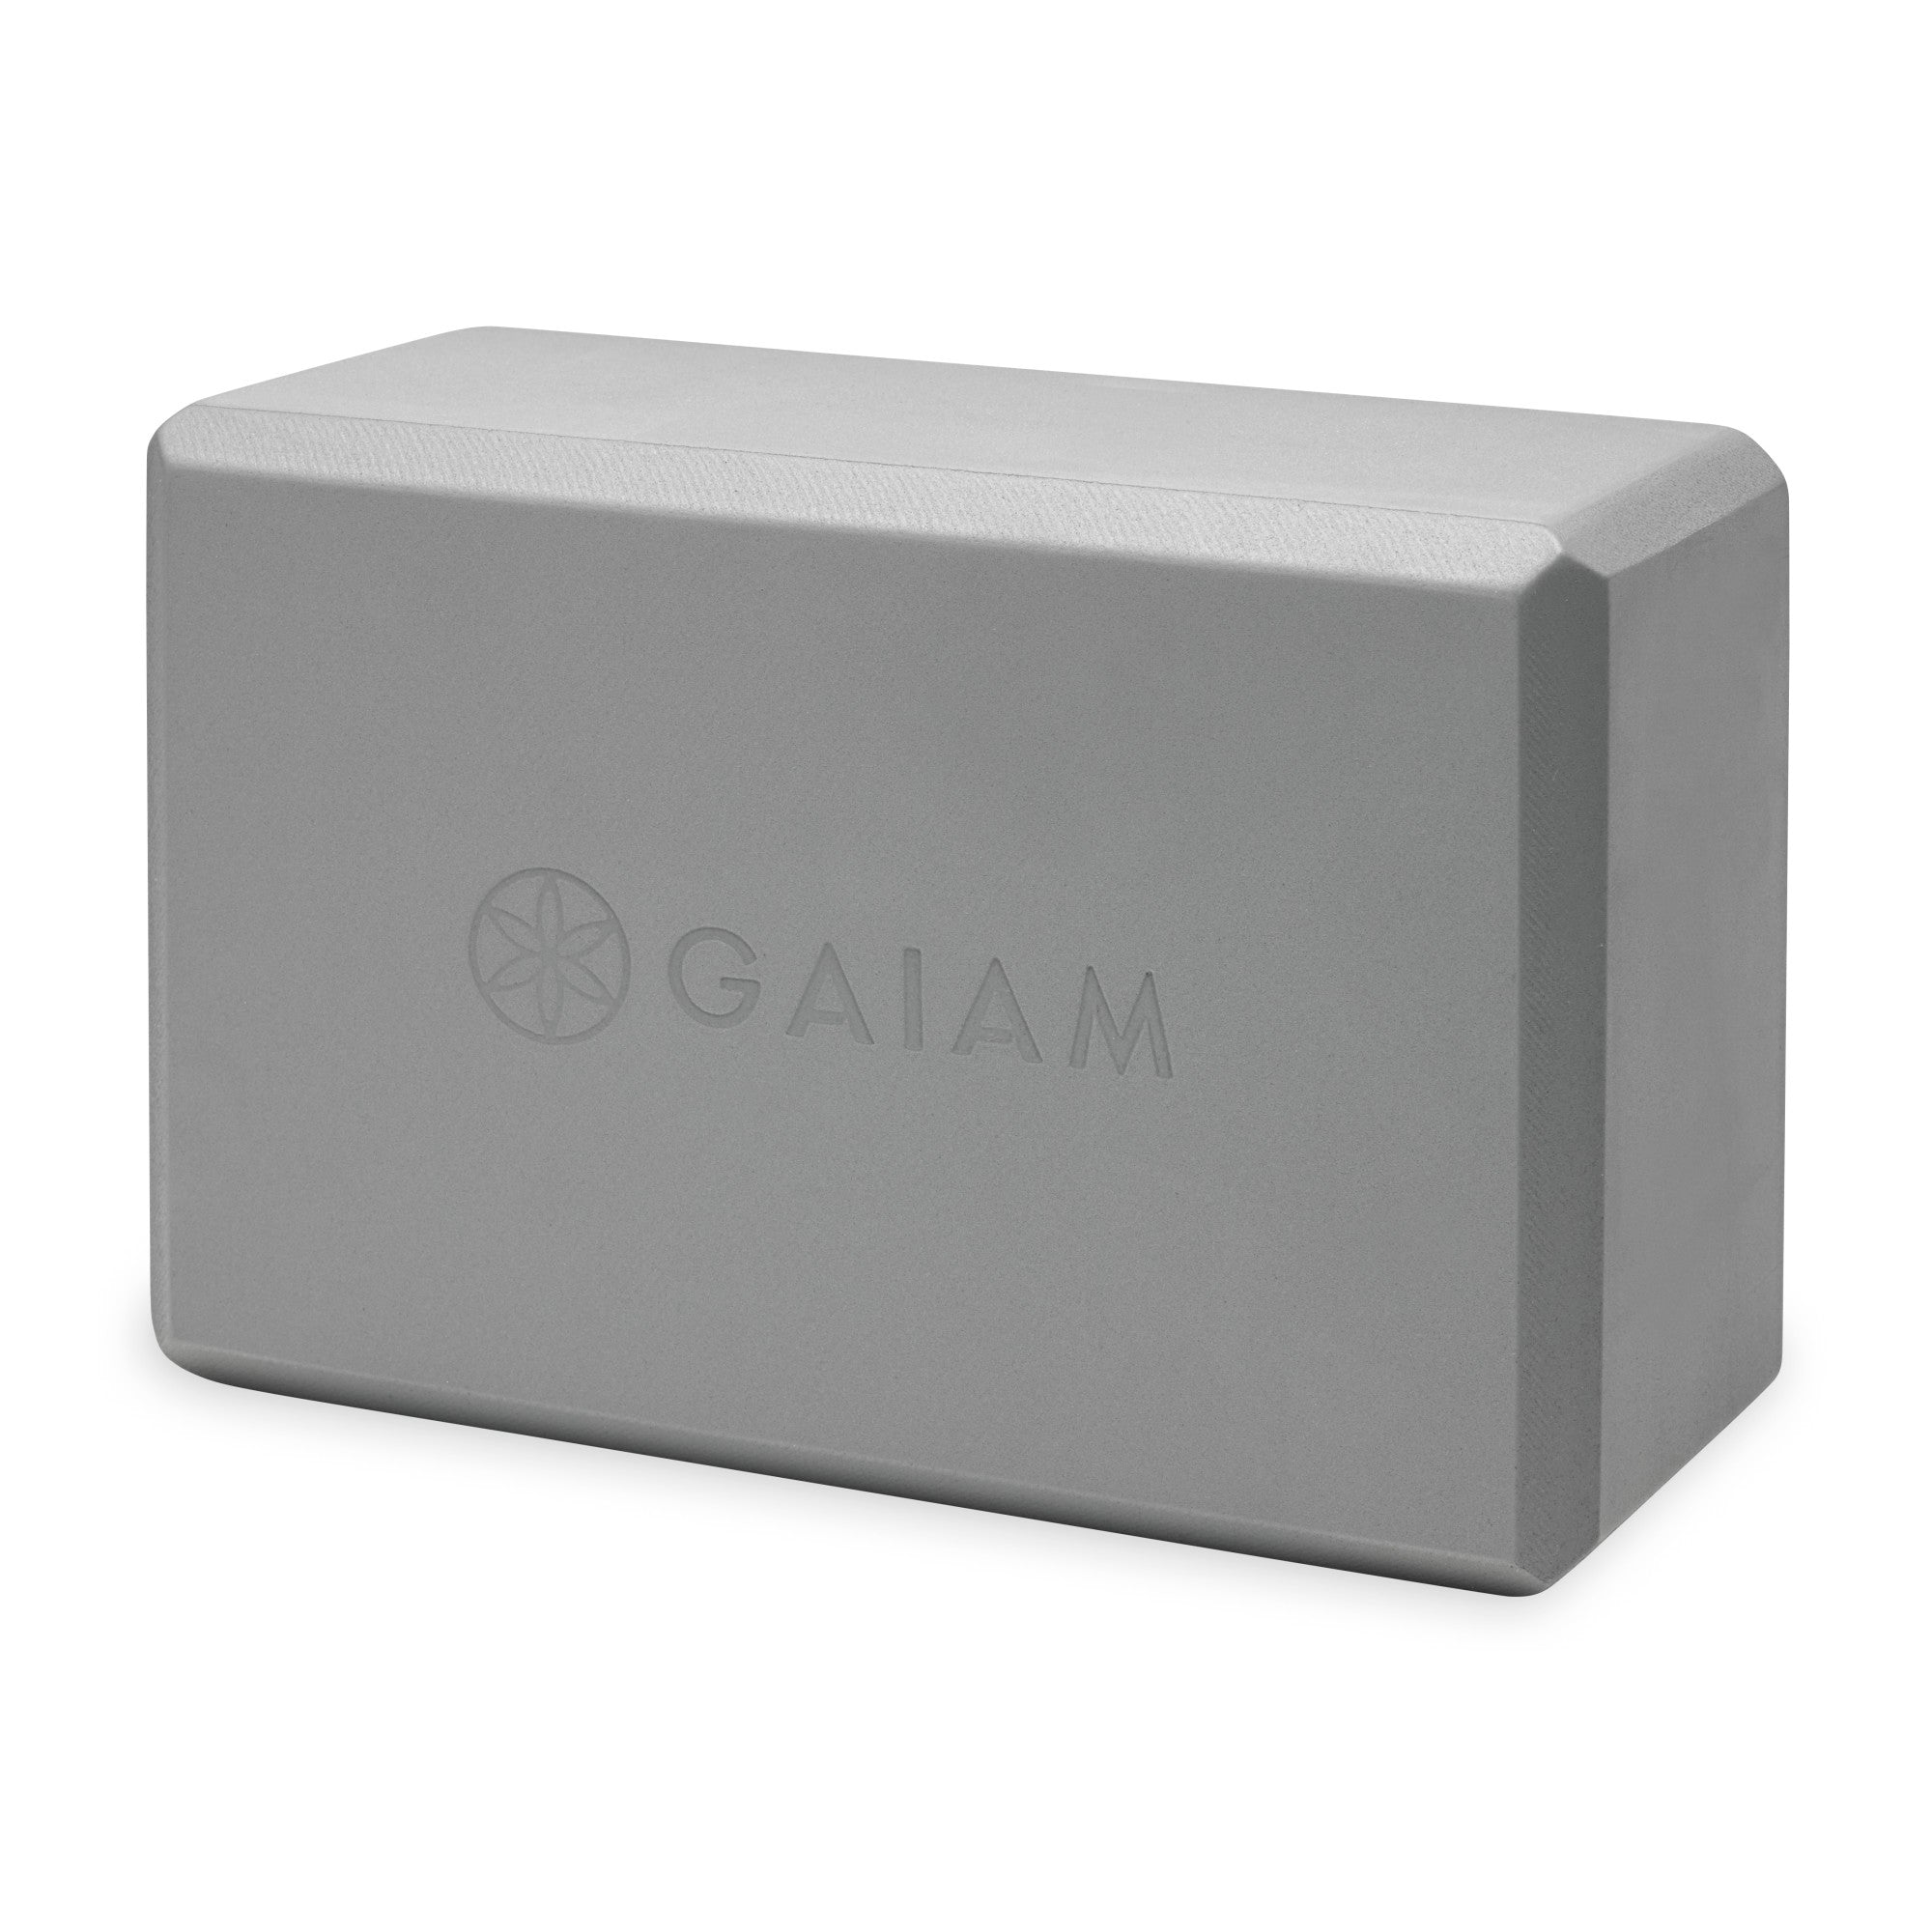 Buy Gaiam Yoga Block - Supportive Latex-Free EVA Foam Soft Non-Slip Surface  for Yoga, Pilates, Meditation (Navajo Black) Online at Lowest Price Ever in  India